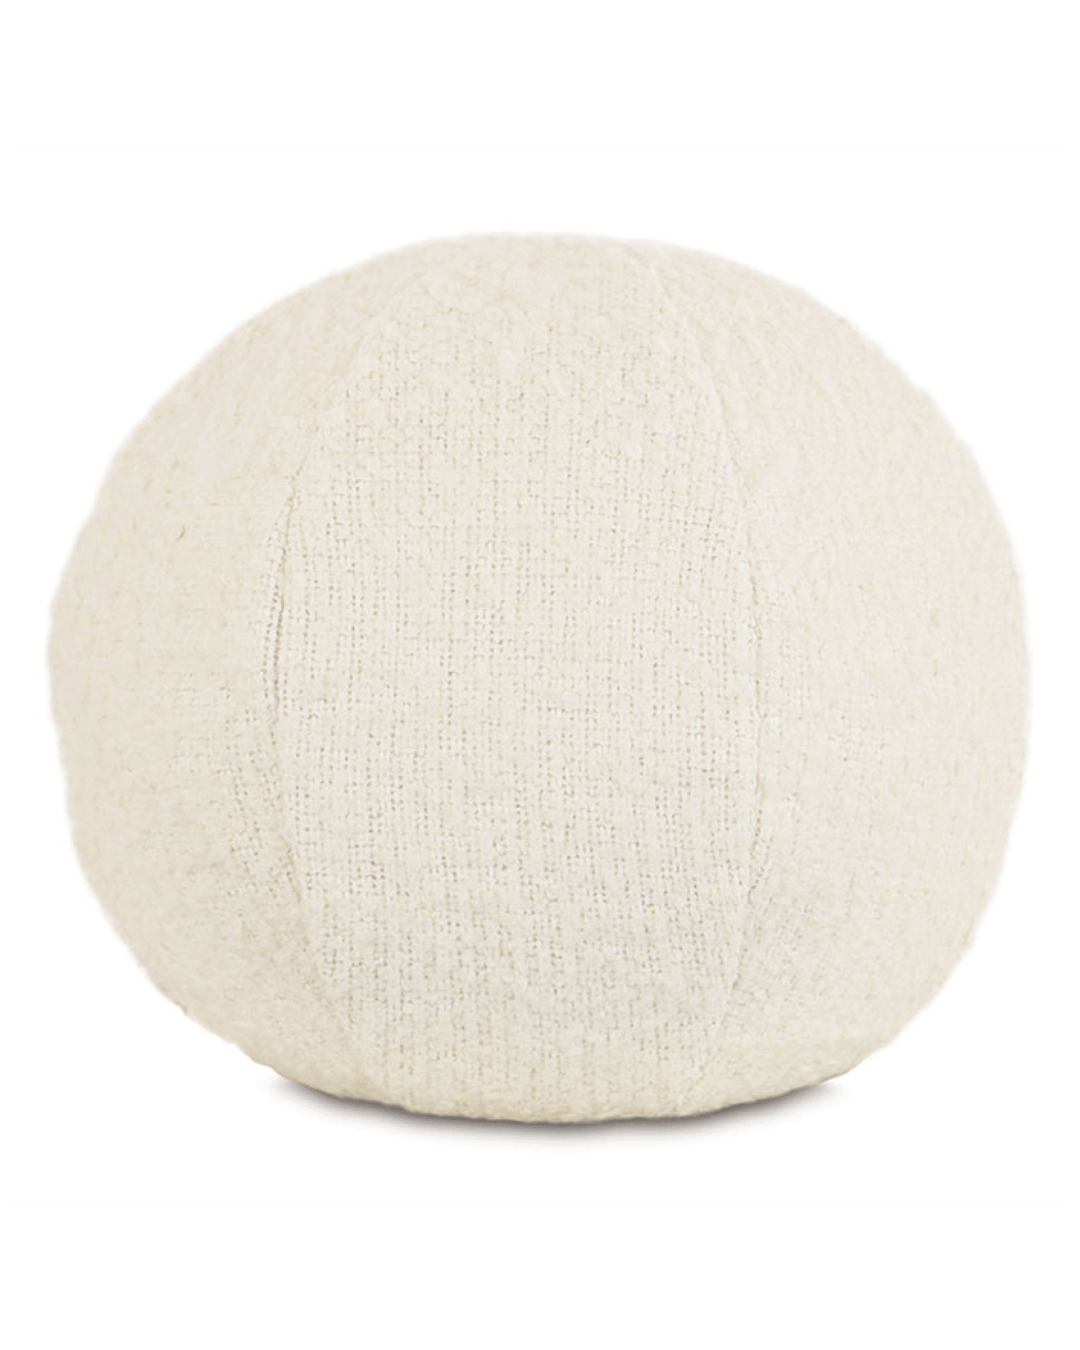 A textured white sphere with a slightly puckered surface, resembling knit fabric in Bungalow style, isolated on a white background. This is the Mar Cream Pillow by Eastern Accents.